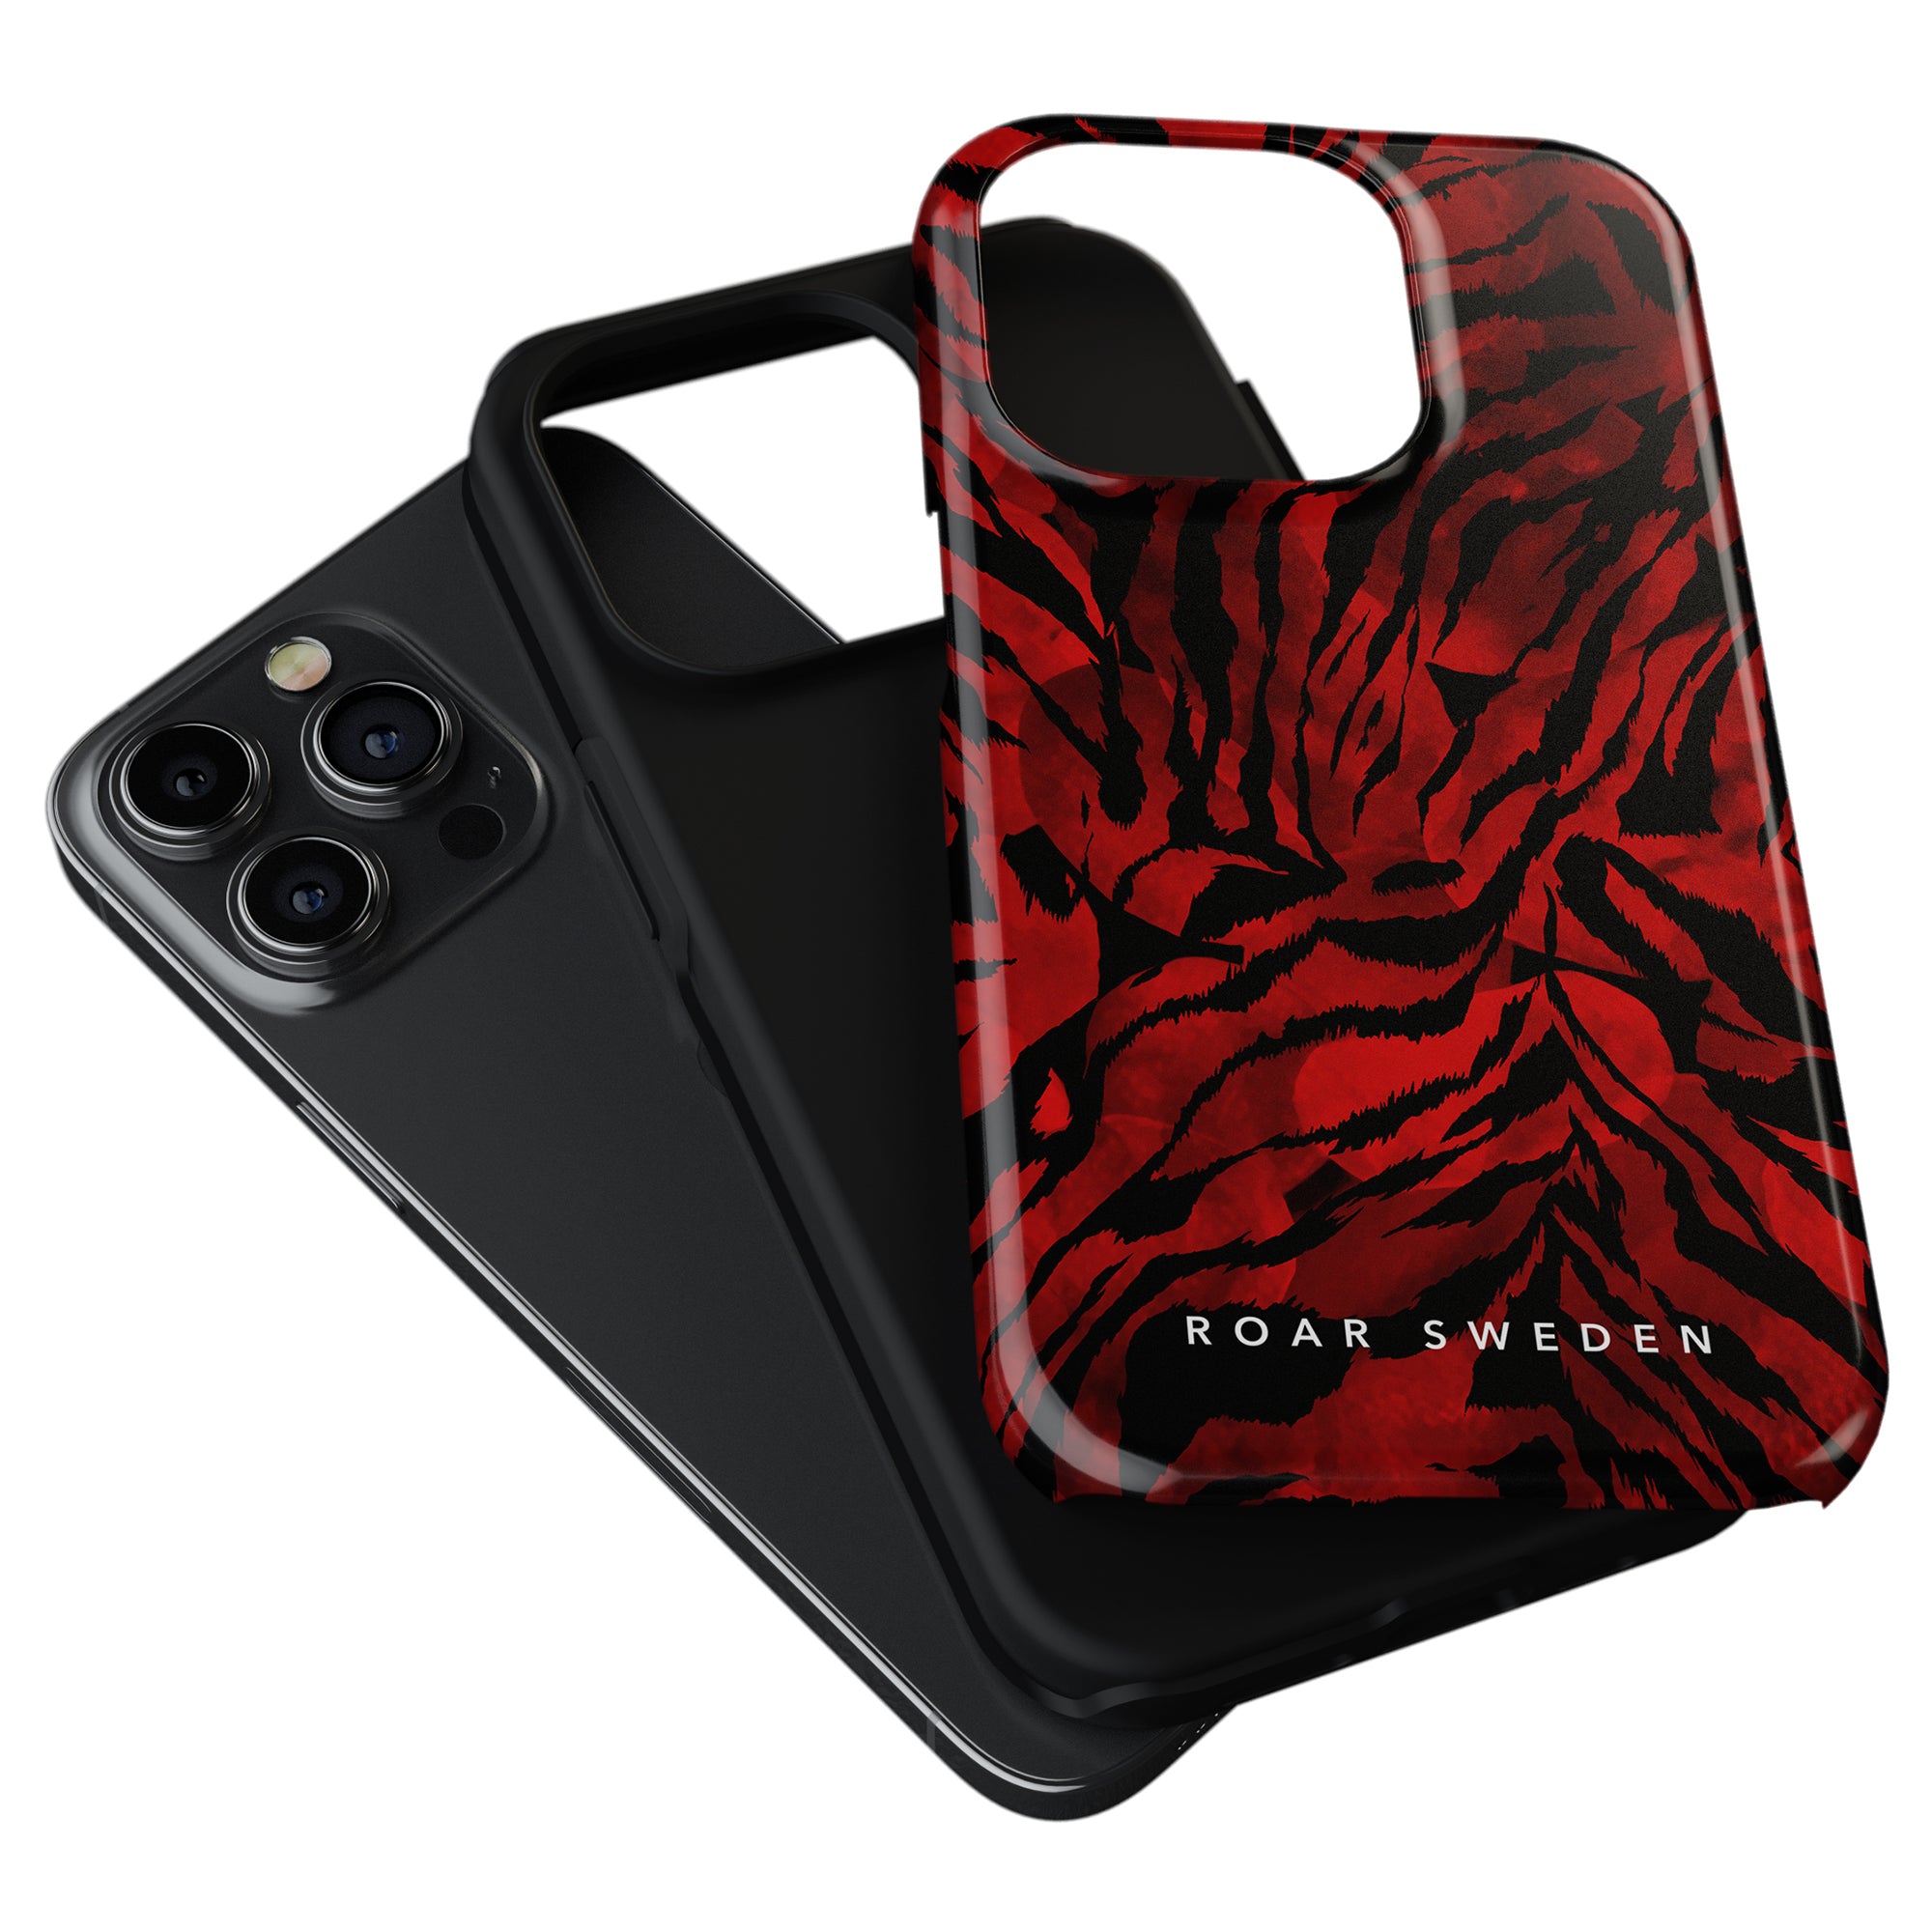 A vibrant and stylish Blood Tiger - Tough Case designed specifically for the sleek iPhone 11.